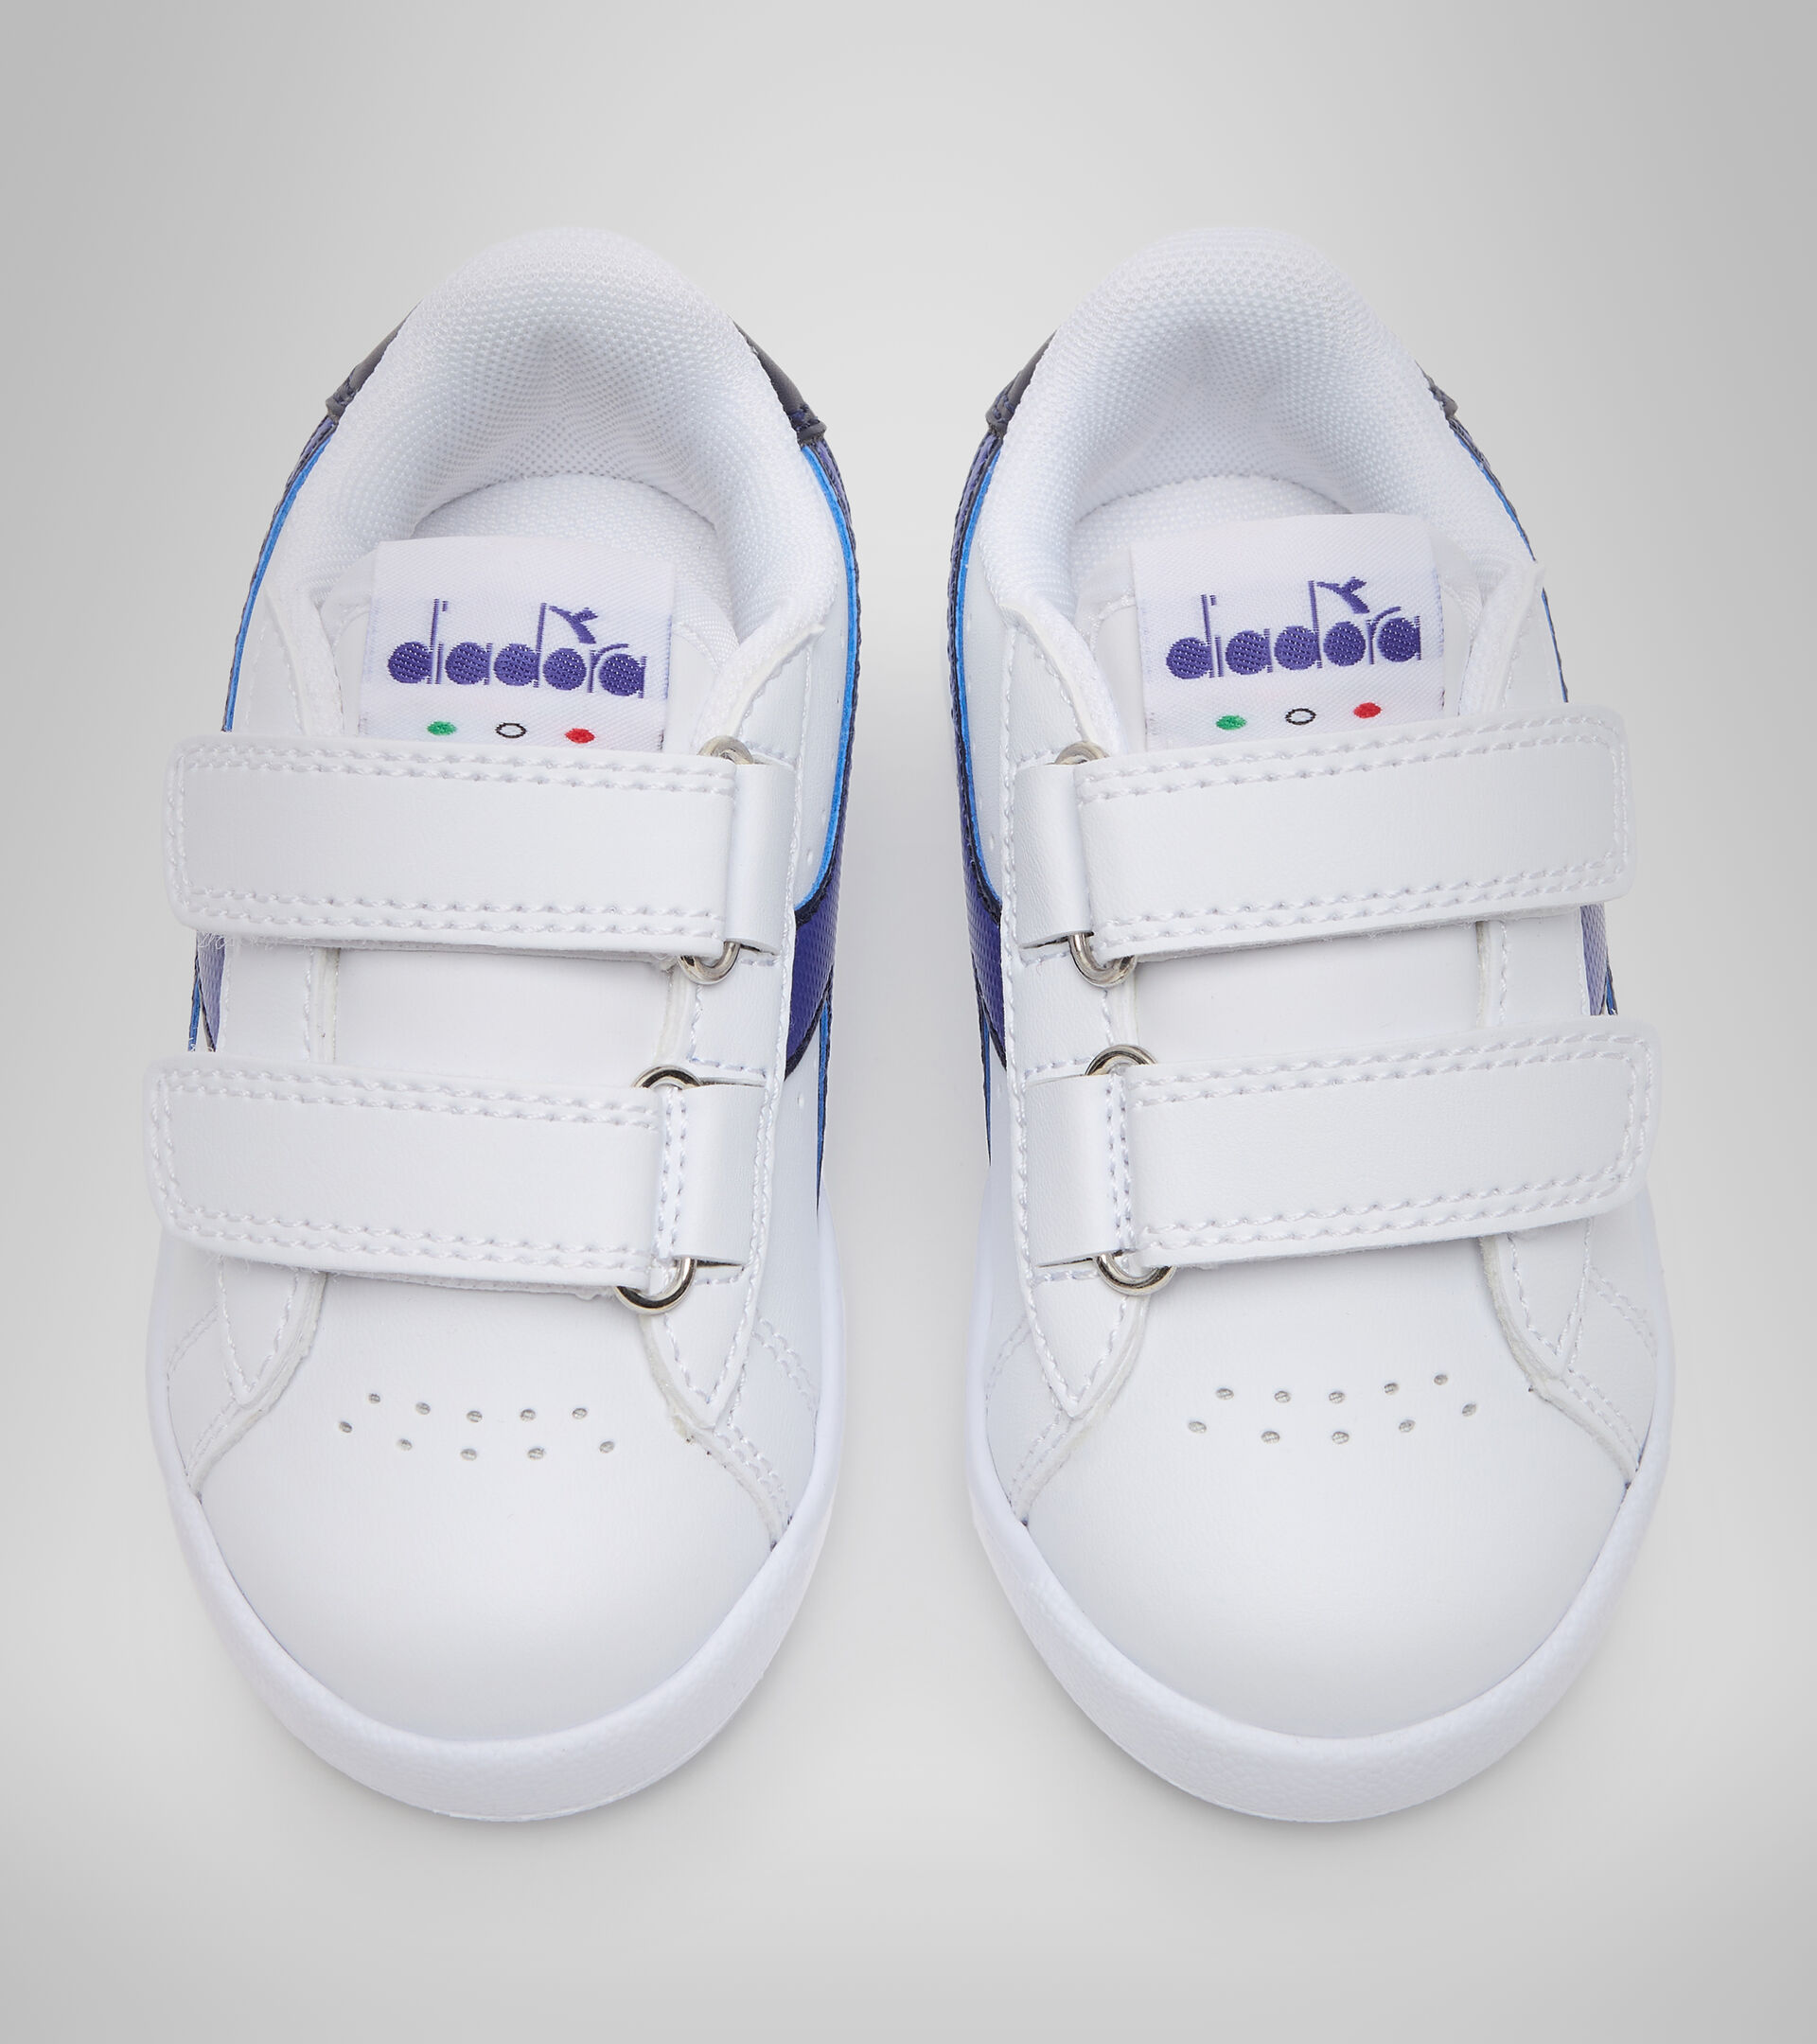 Sports shoes - Toddlers 1-4 years GAME P TD WHITE/PEACOAT - Diadora